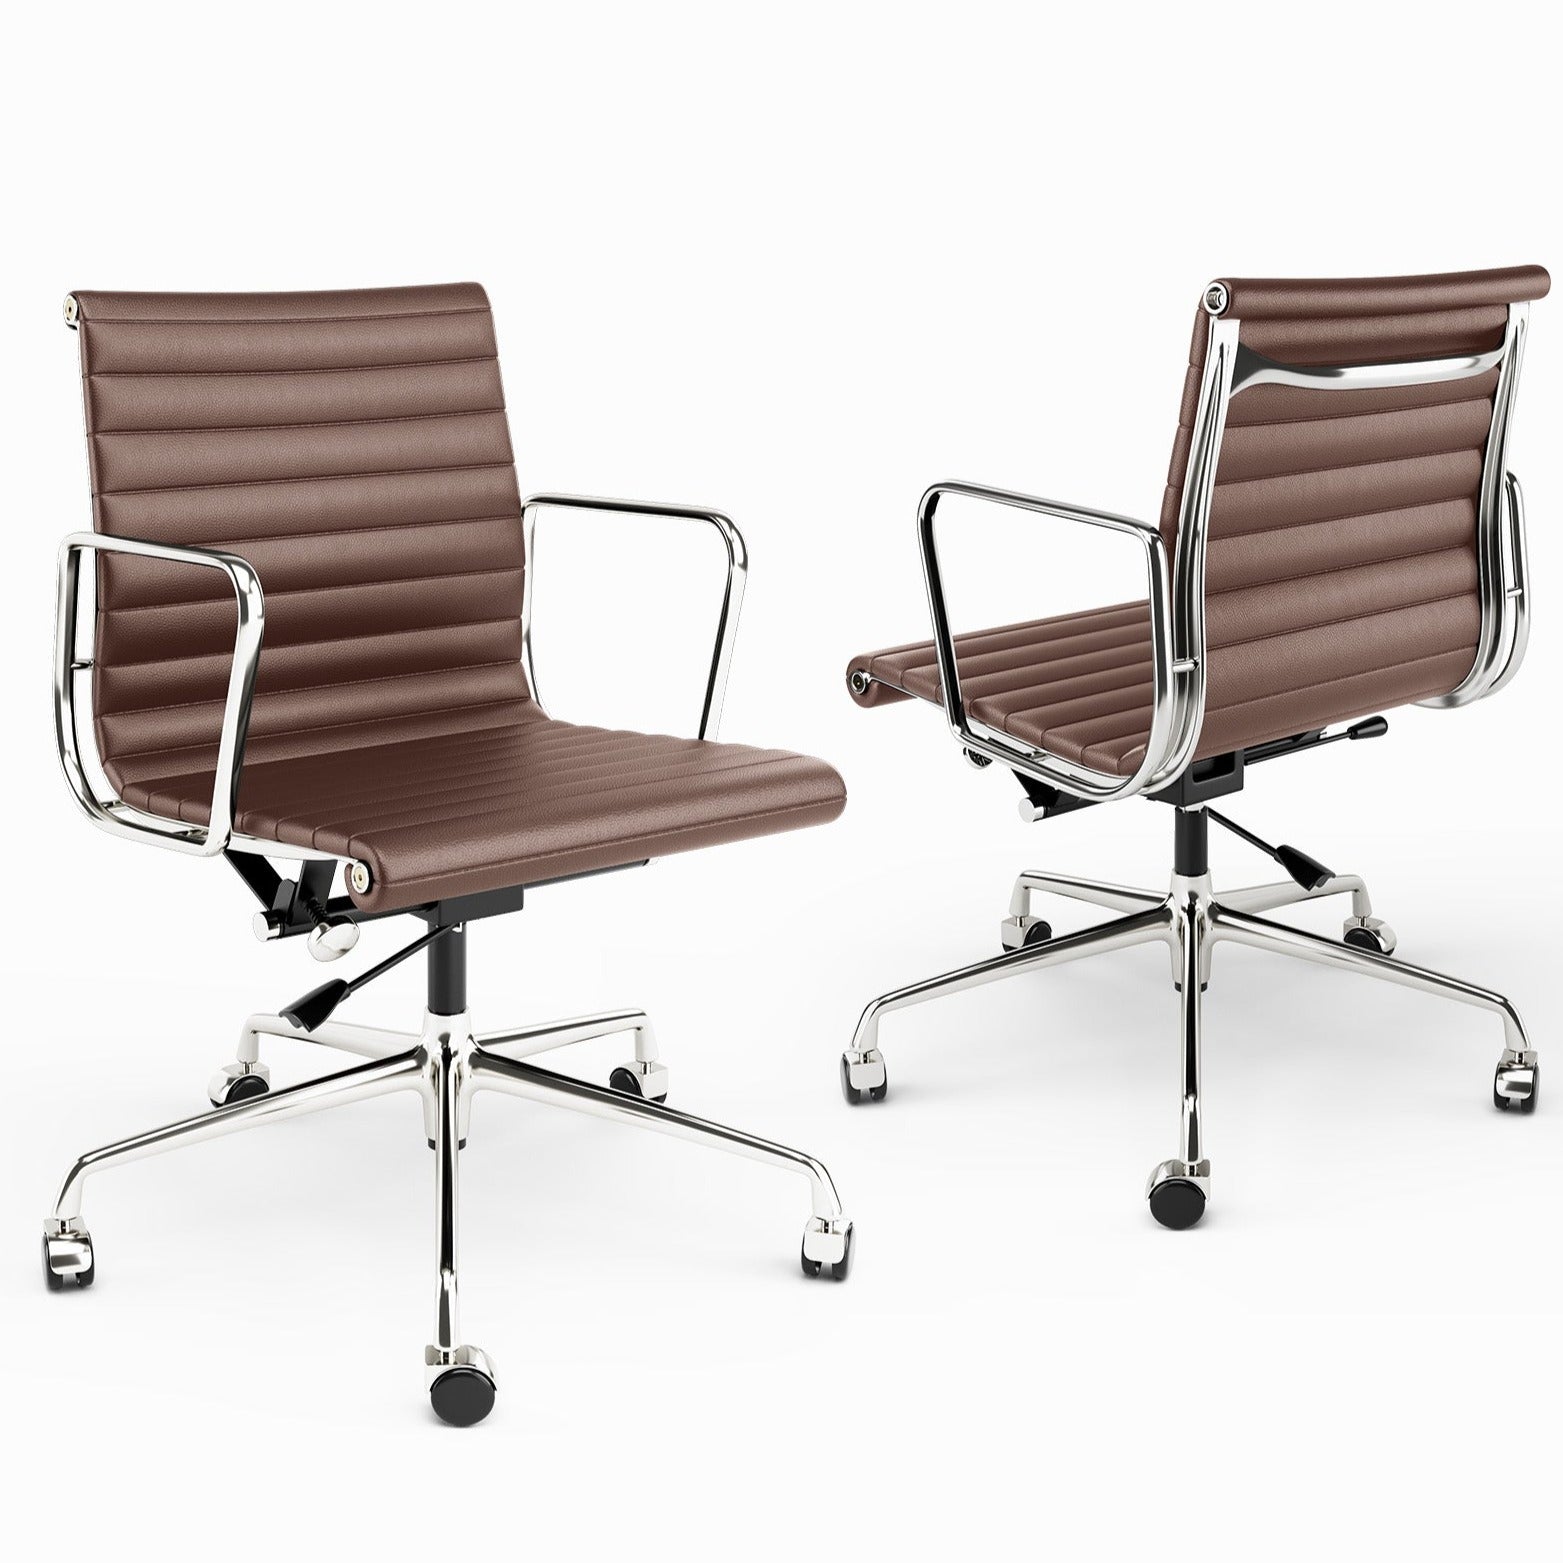 Luxuriance Designs - Eames Aluminum Group Chair - Brown Color and Low Back - Review